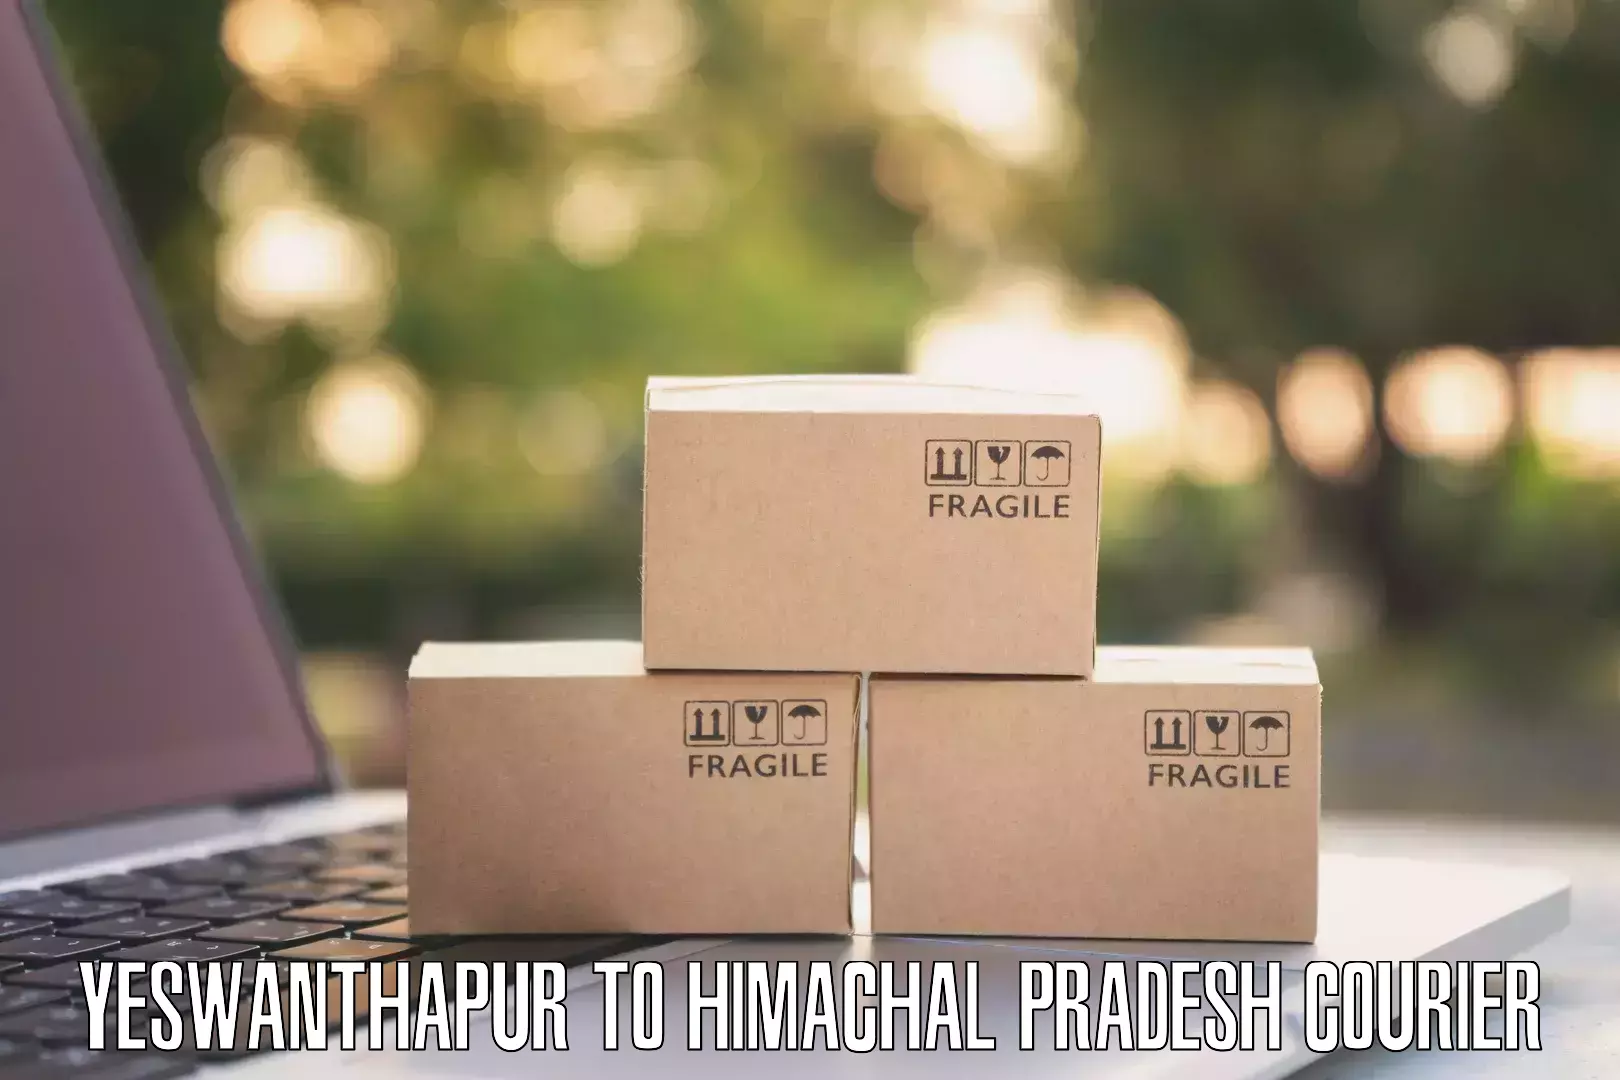 Next-day freight services Yeswanthapur to Himachal Pradesh